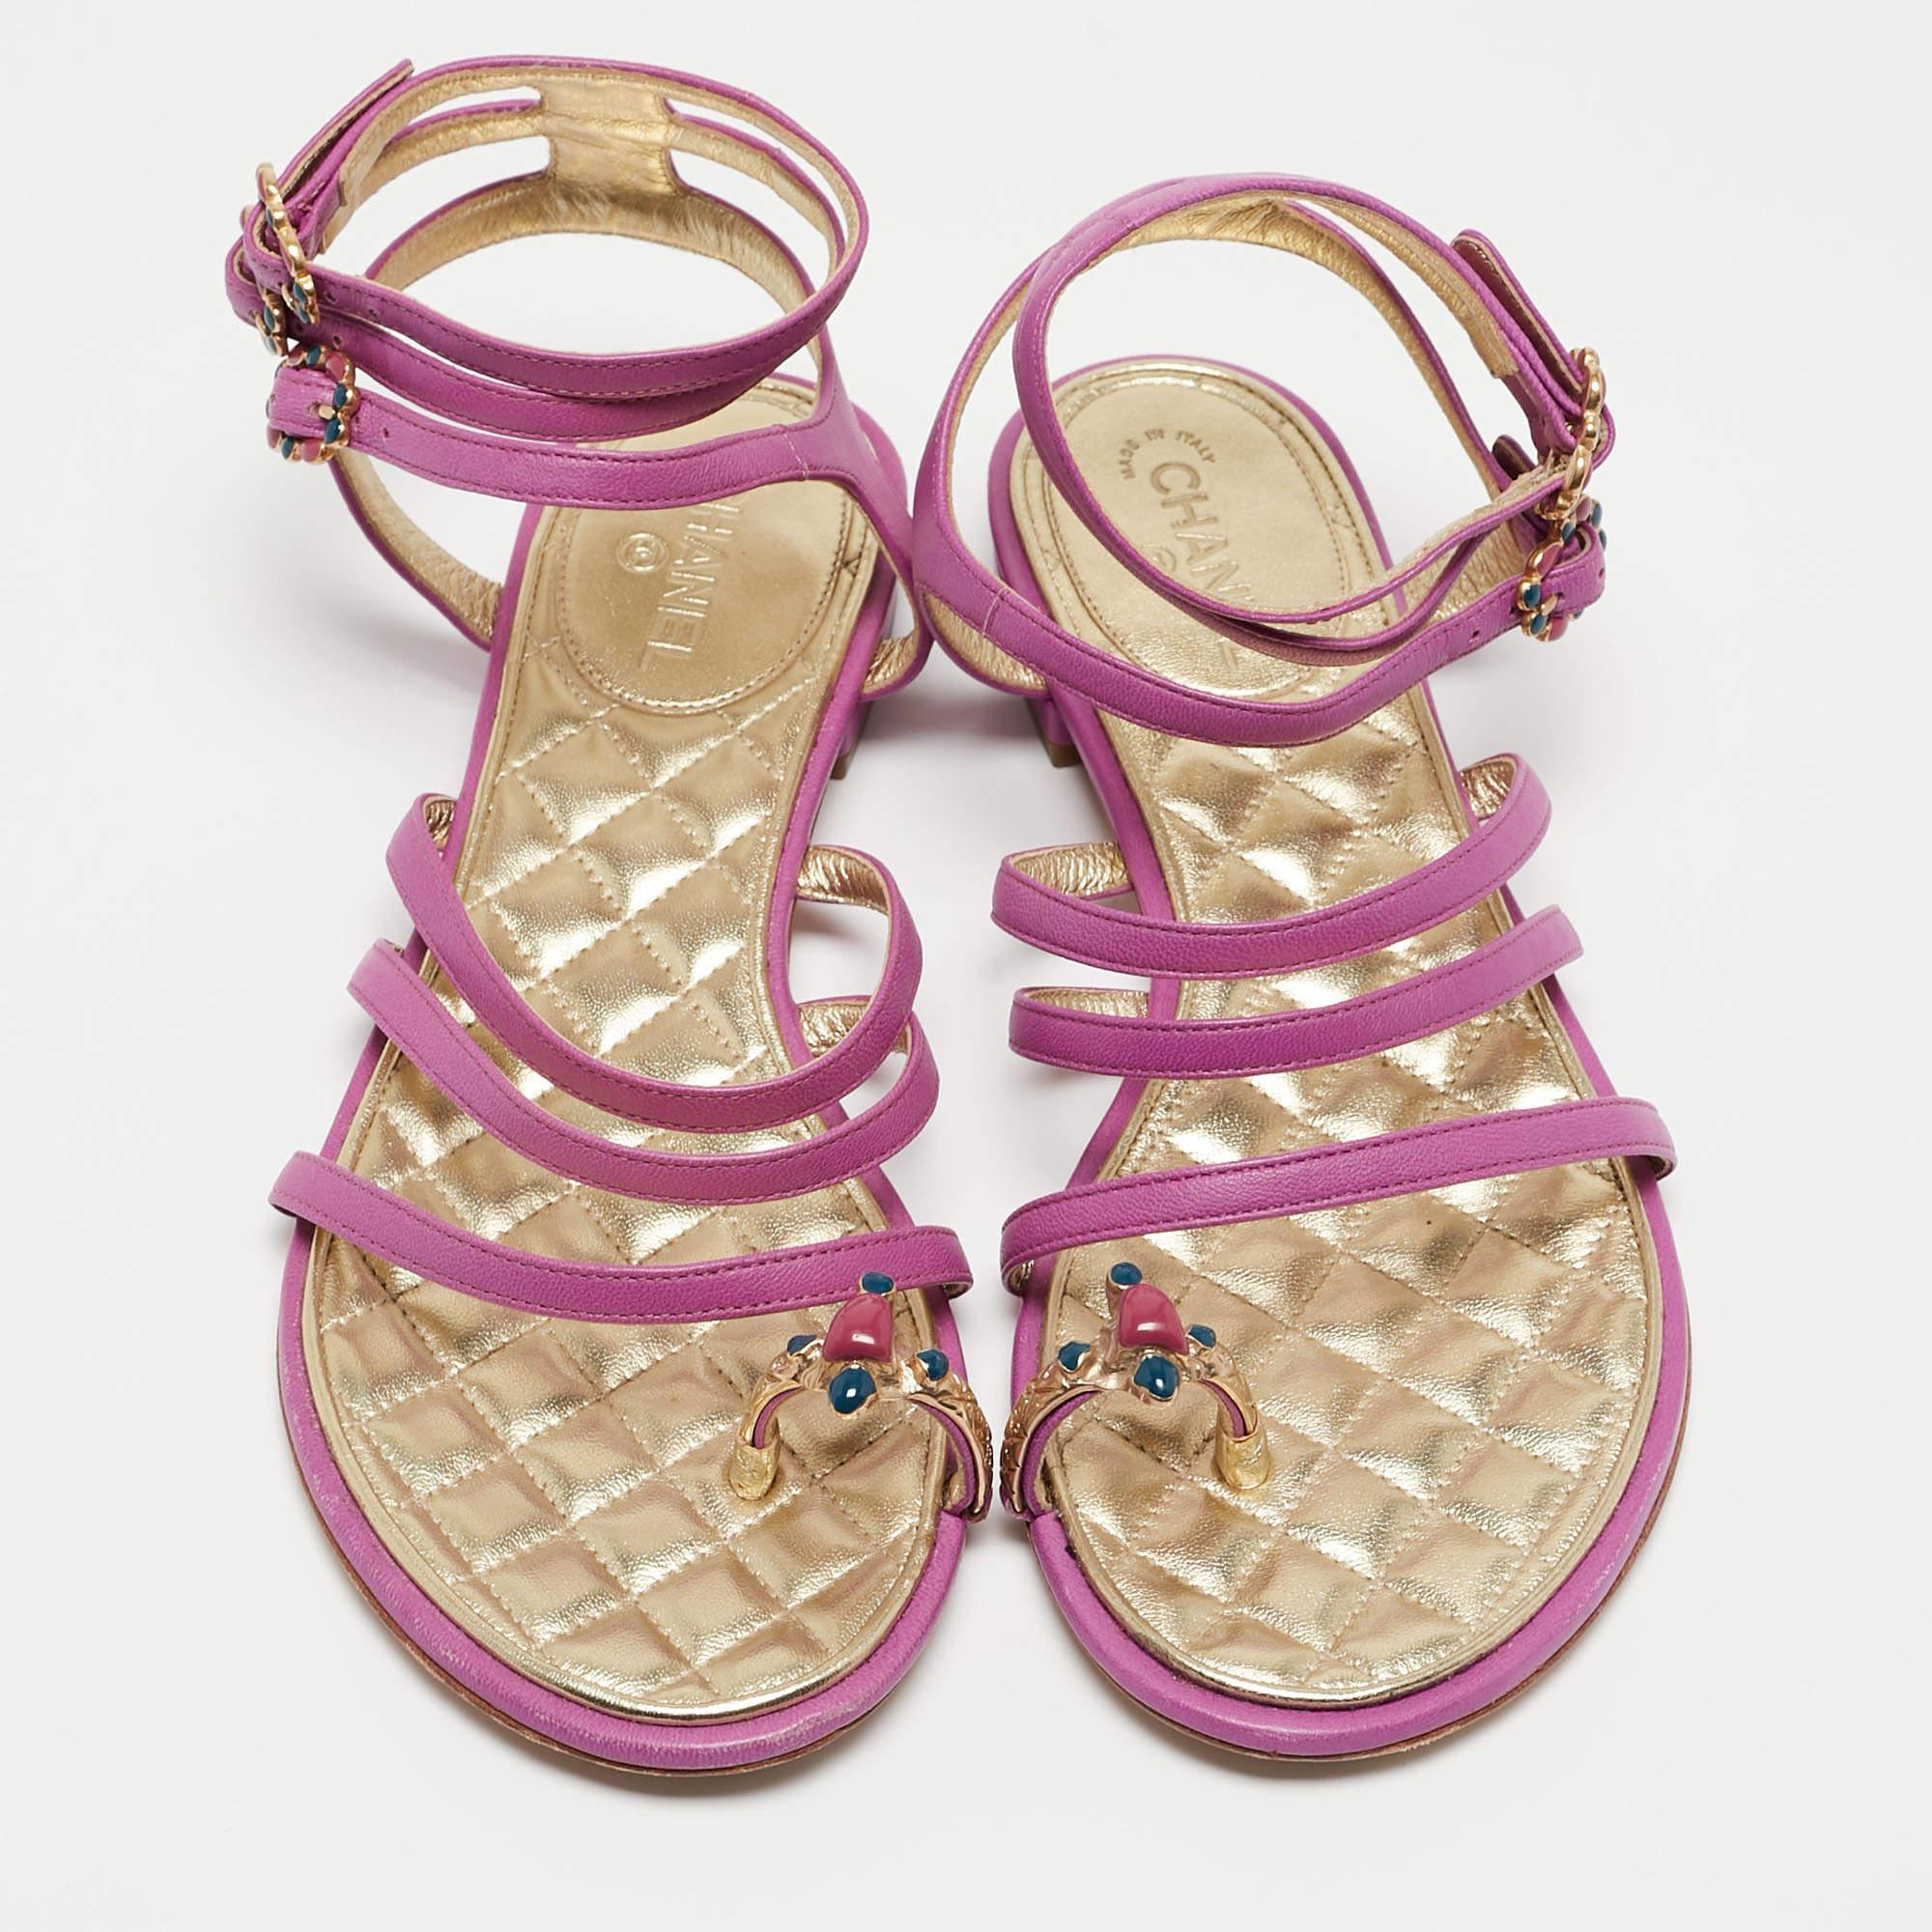 Let your pals go green with envy when you step out wearing these gorgeous sandals from Chanel! They have been crafted from purple leather and designed in a striking silhouette. They flaunt embellished toe rings.

